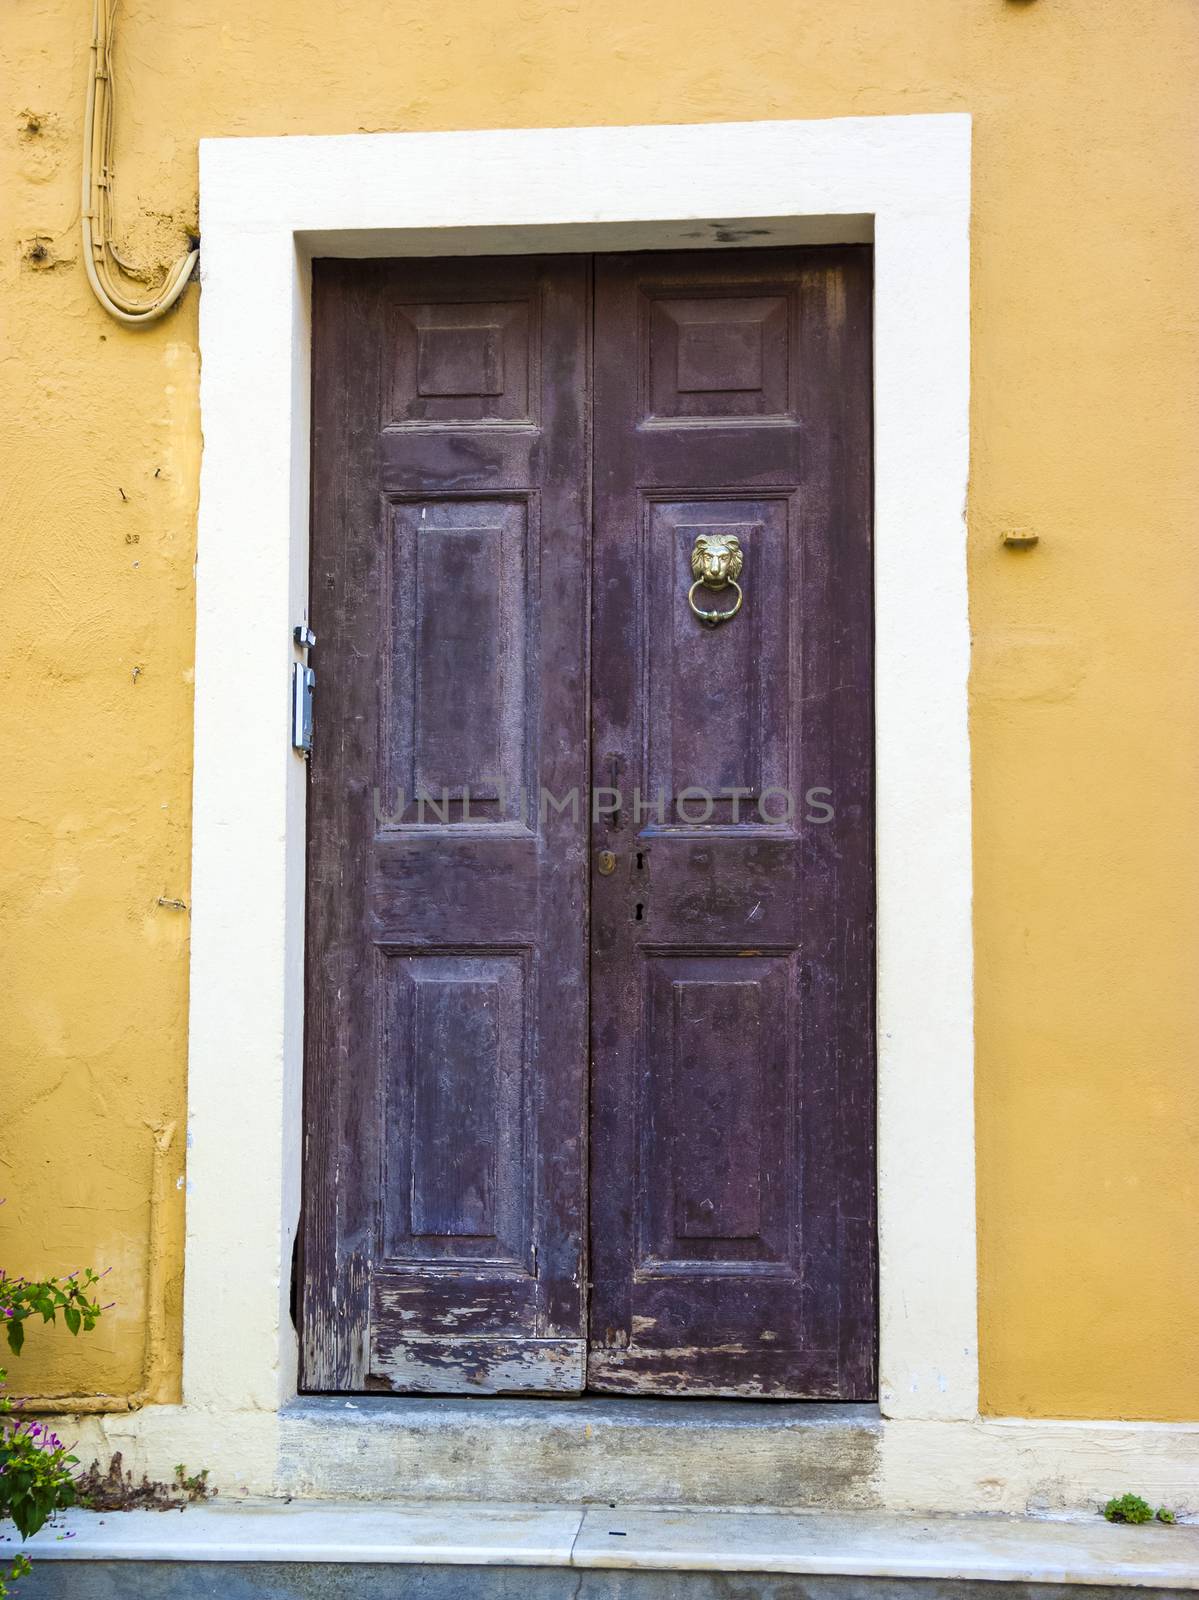 Entrance into old house in Corfu, Greece.